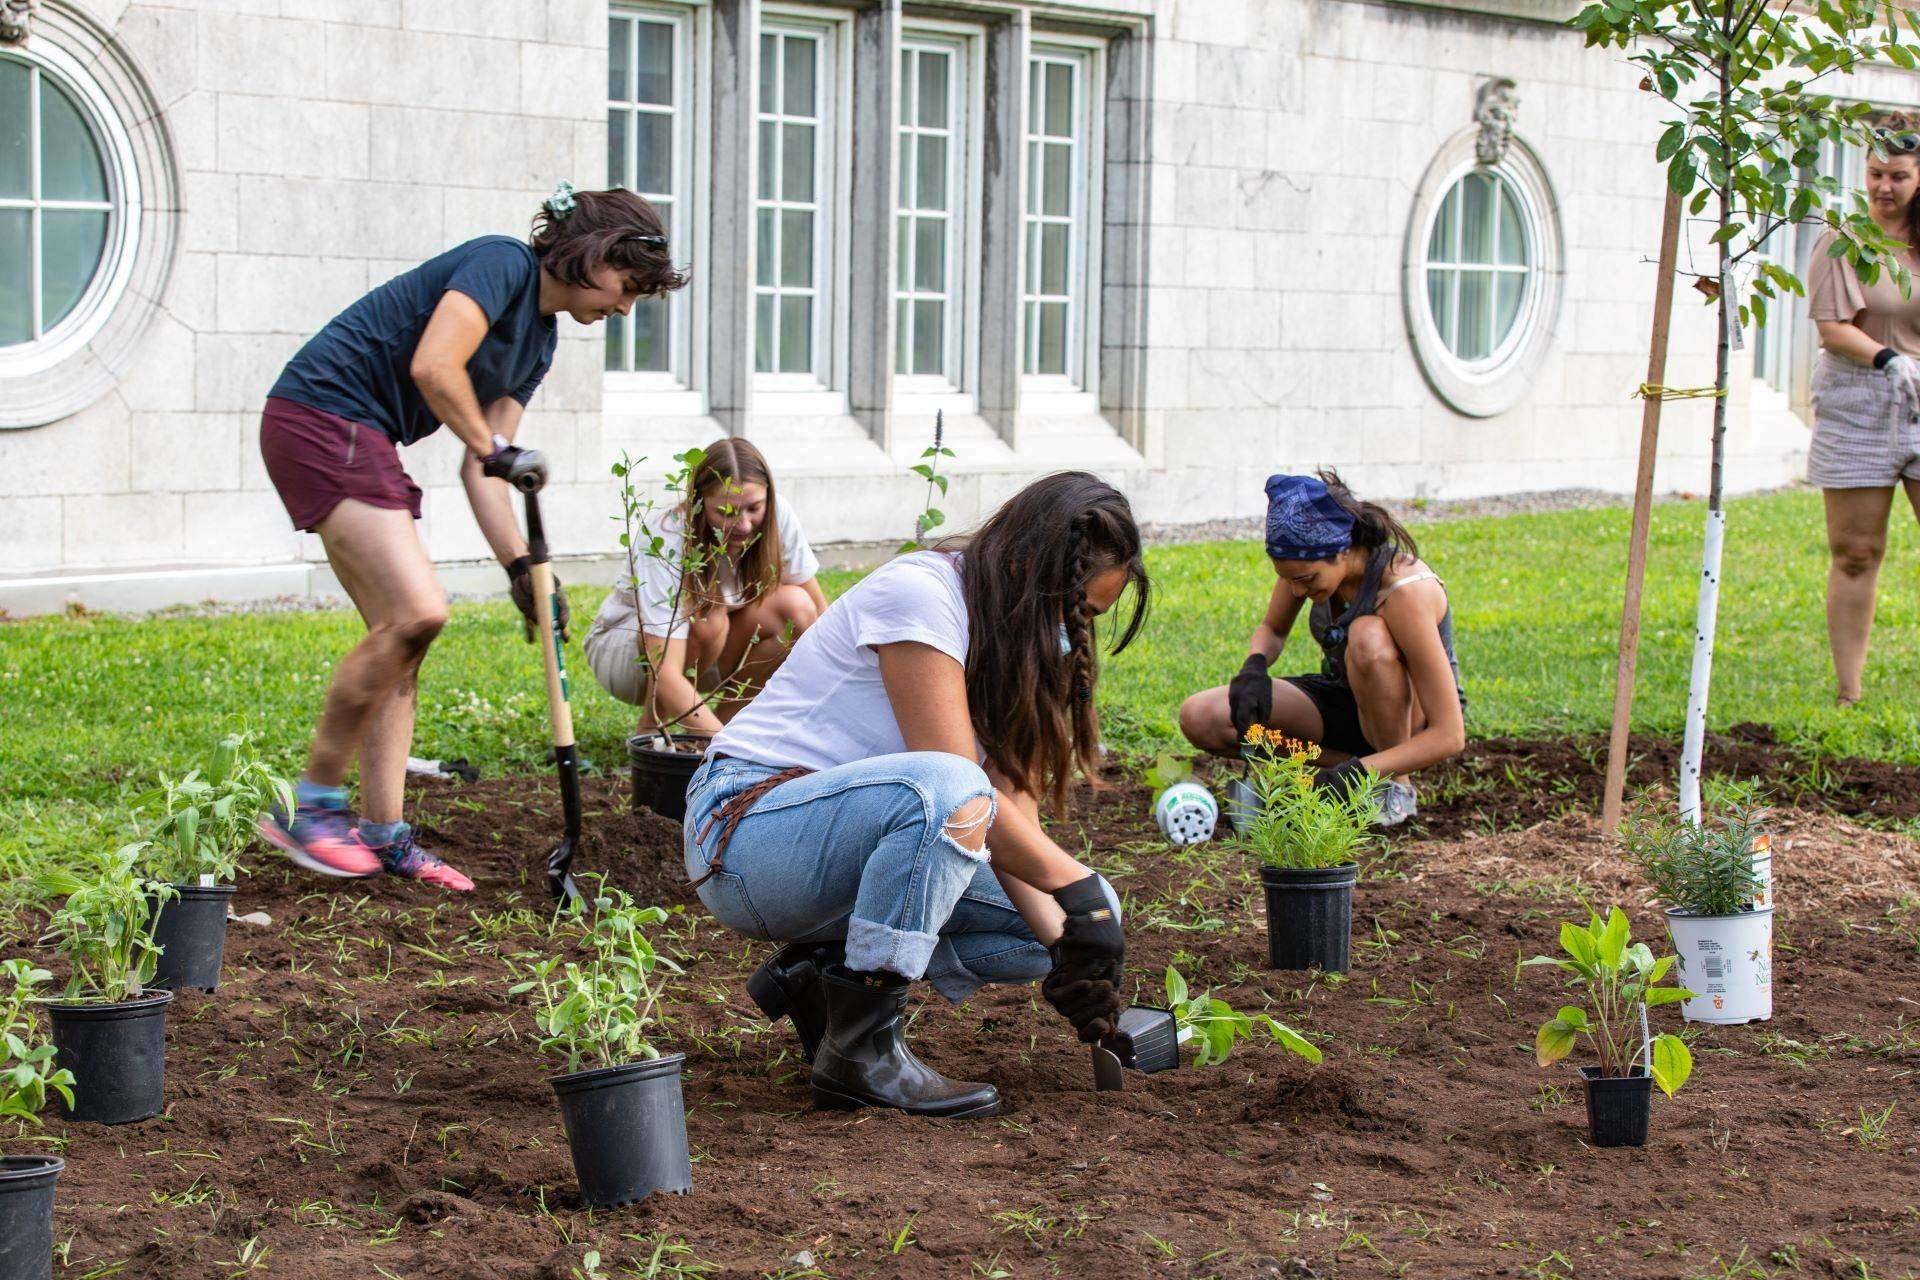 Carly Ziter works with the students from her Ecology of Urban Environments course to plant a pollinator garden at Loyola, based on student designs. Photo credit Julian Haber.